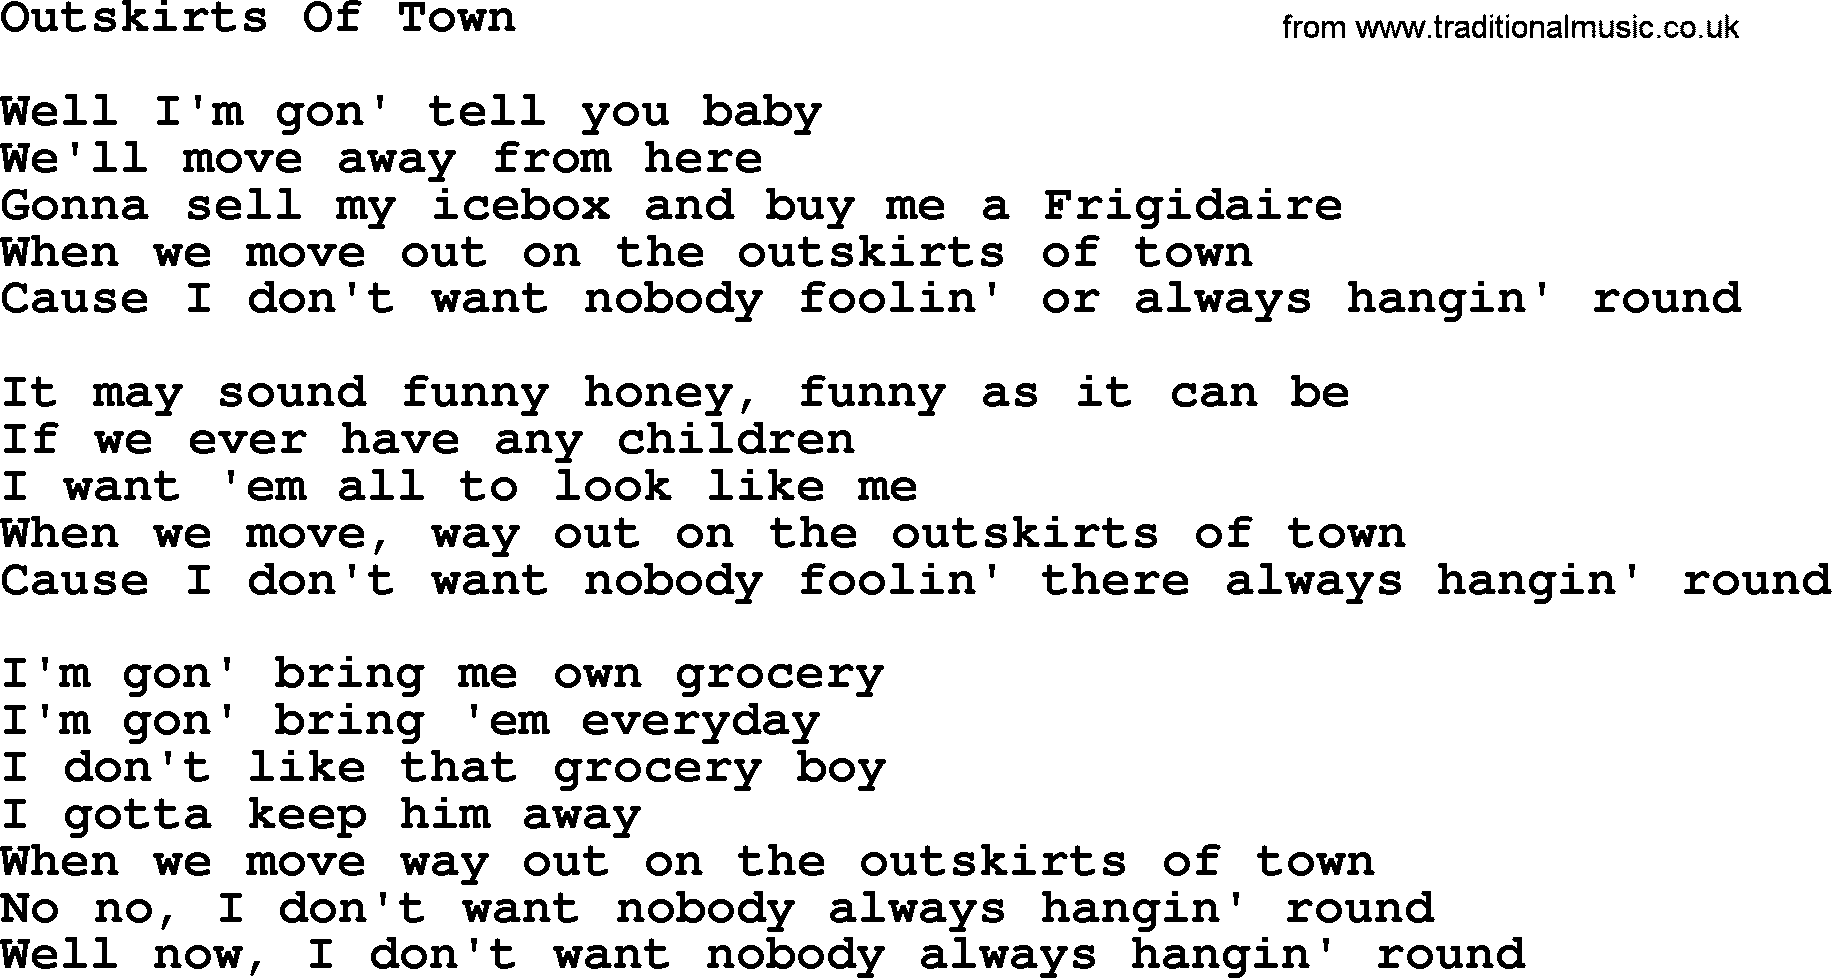 Willie Nelson song: Outskirts Of Town lyrics